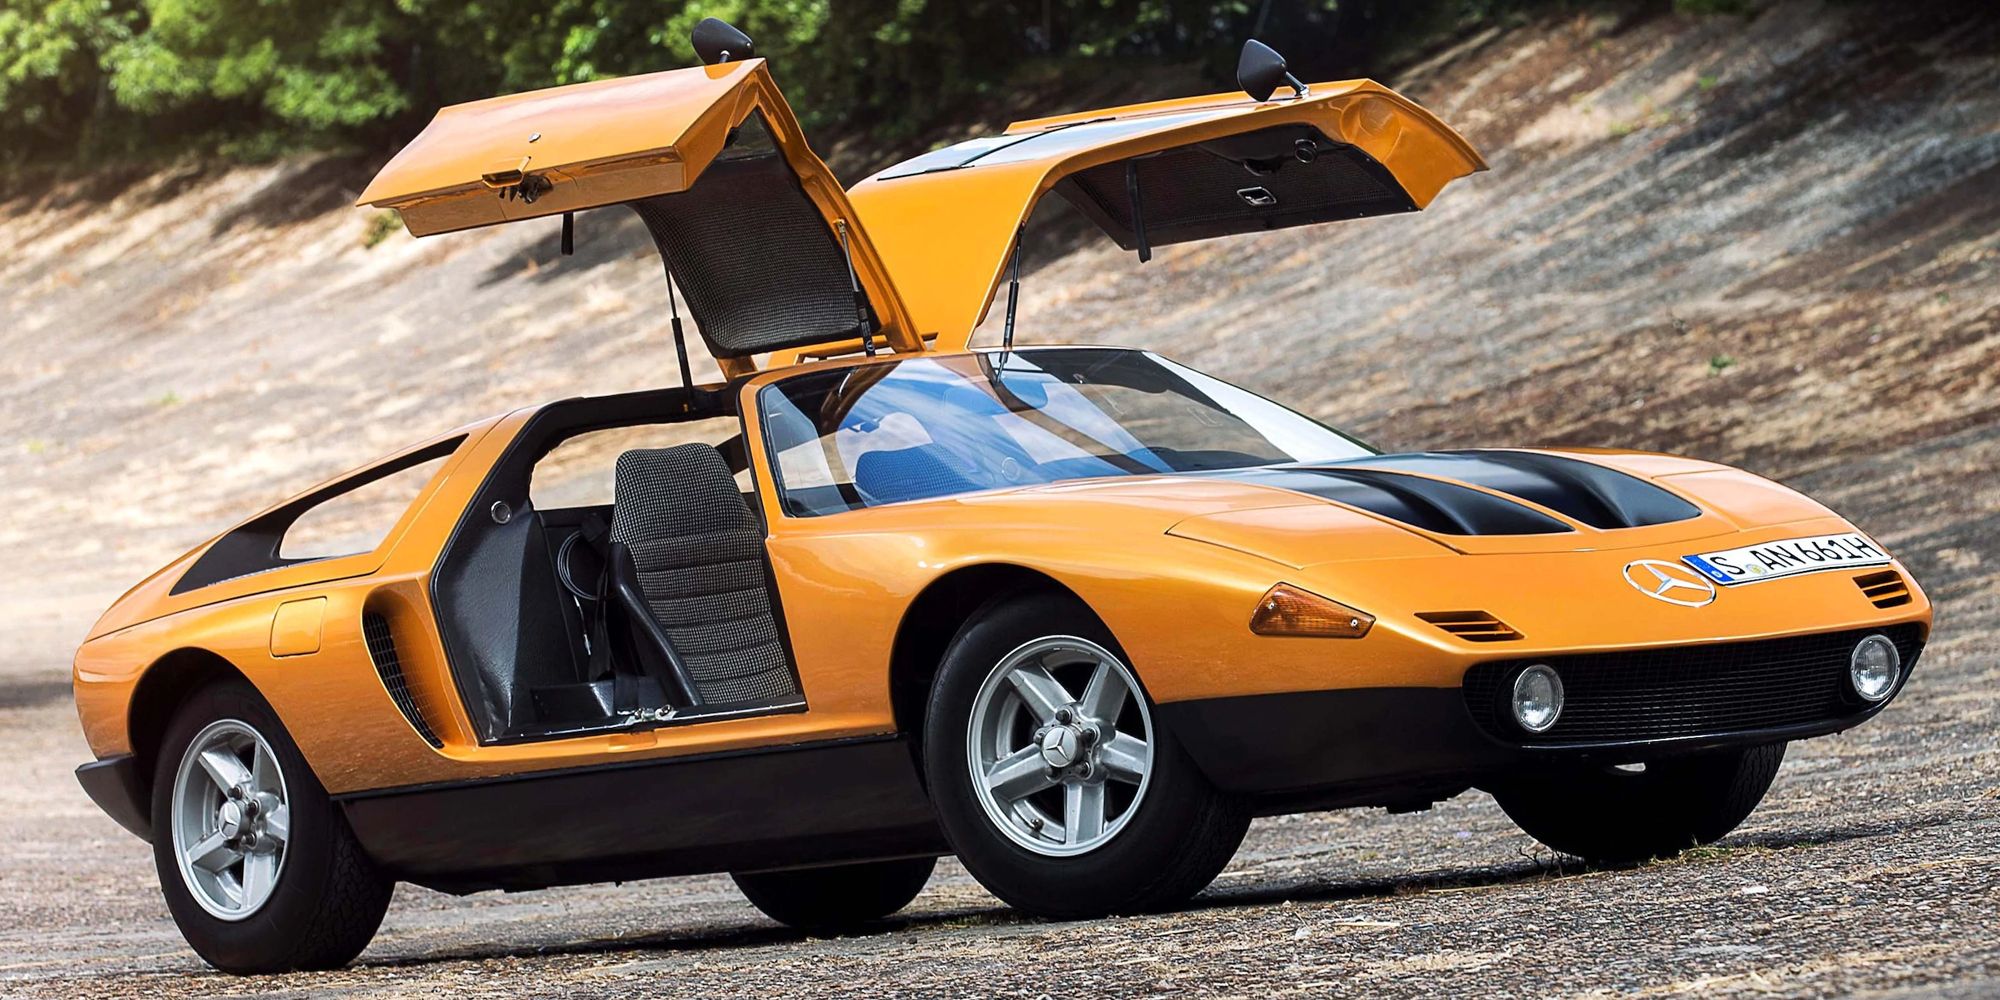 The C111 concept with its doors up